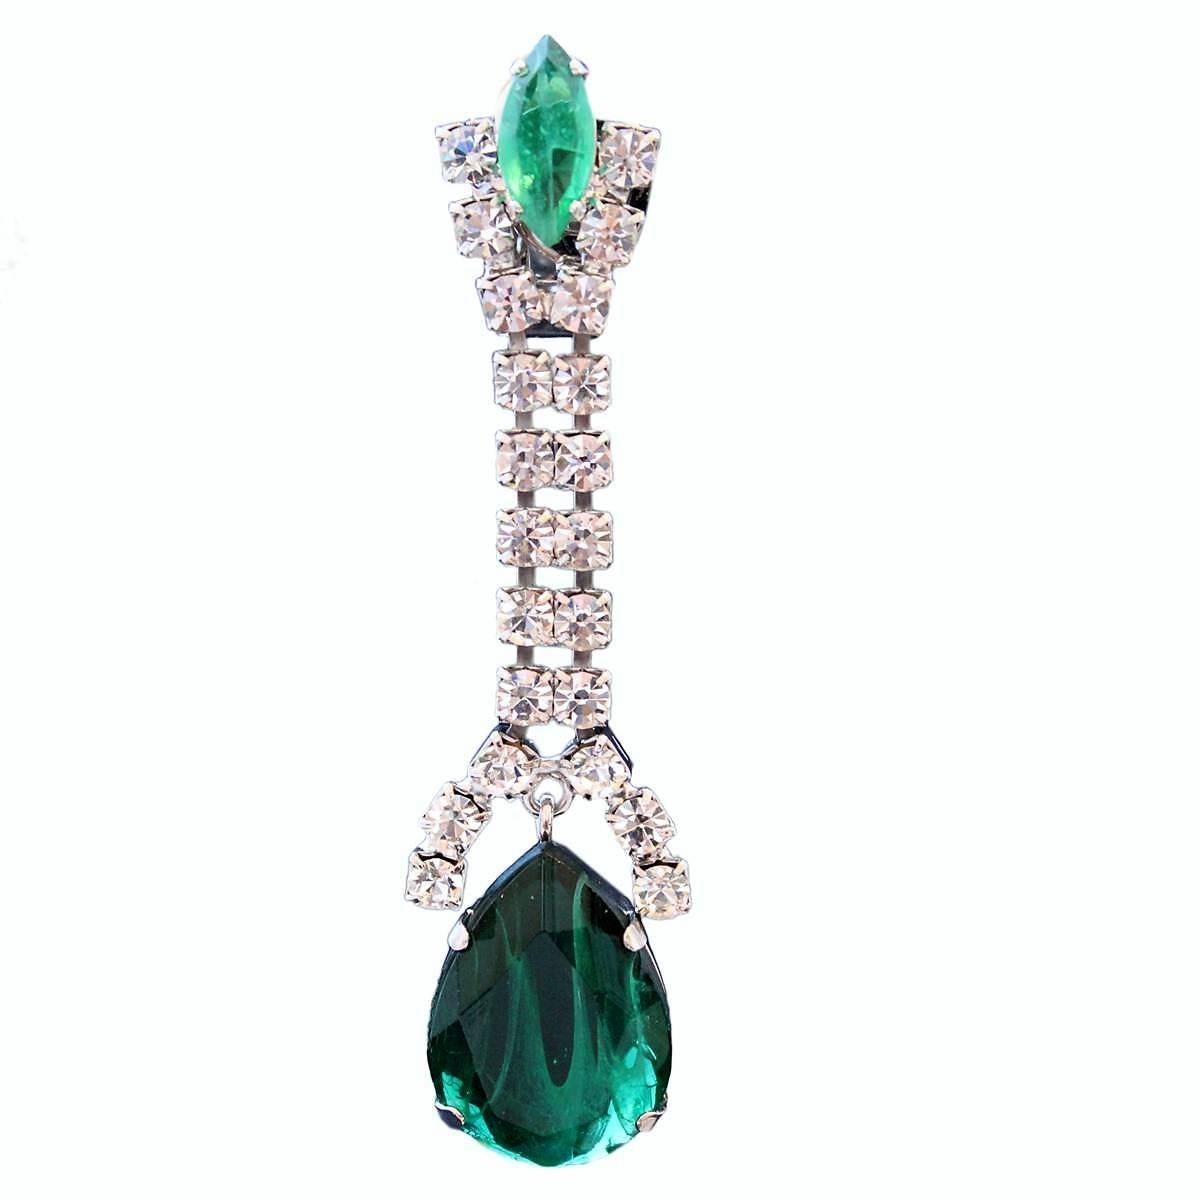 Stunning and marvelous Carlo Zini bijoux earrings
Non allergenic rhodium
Wonderful construction of class A swarovsky crystals
Emerald like elements
Total length cm 8 (3.14 inches)
Clip on closure, pierced on request
100% Artisanal work
Worldwide